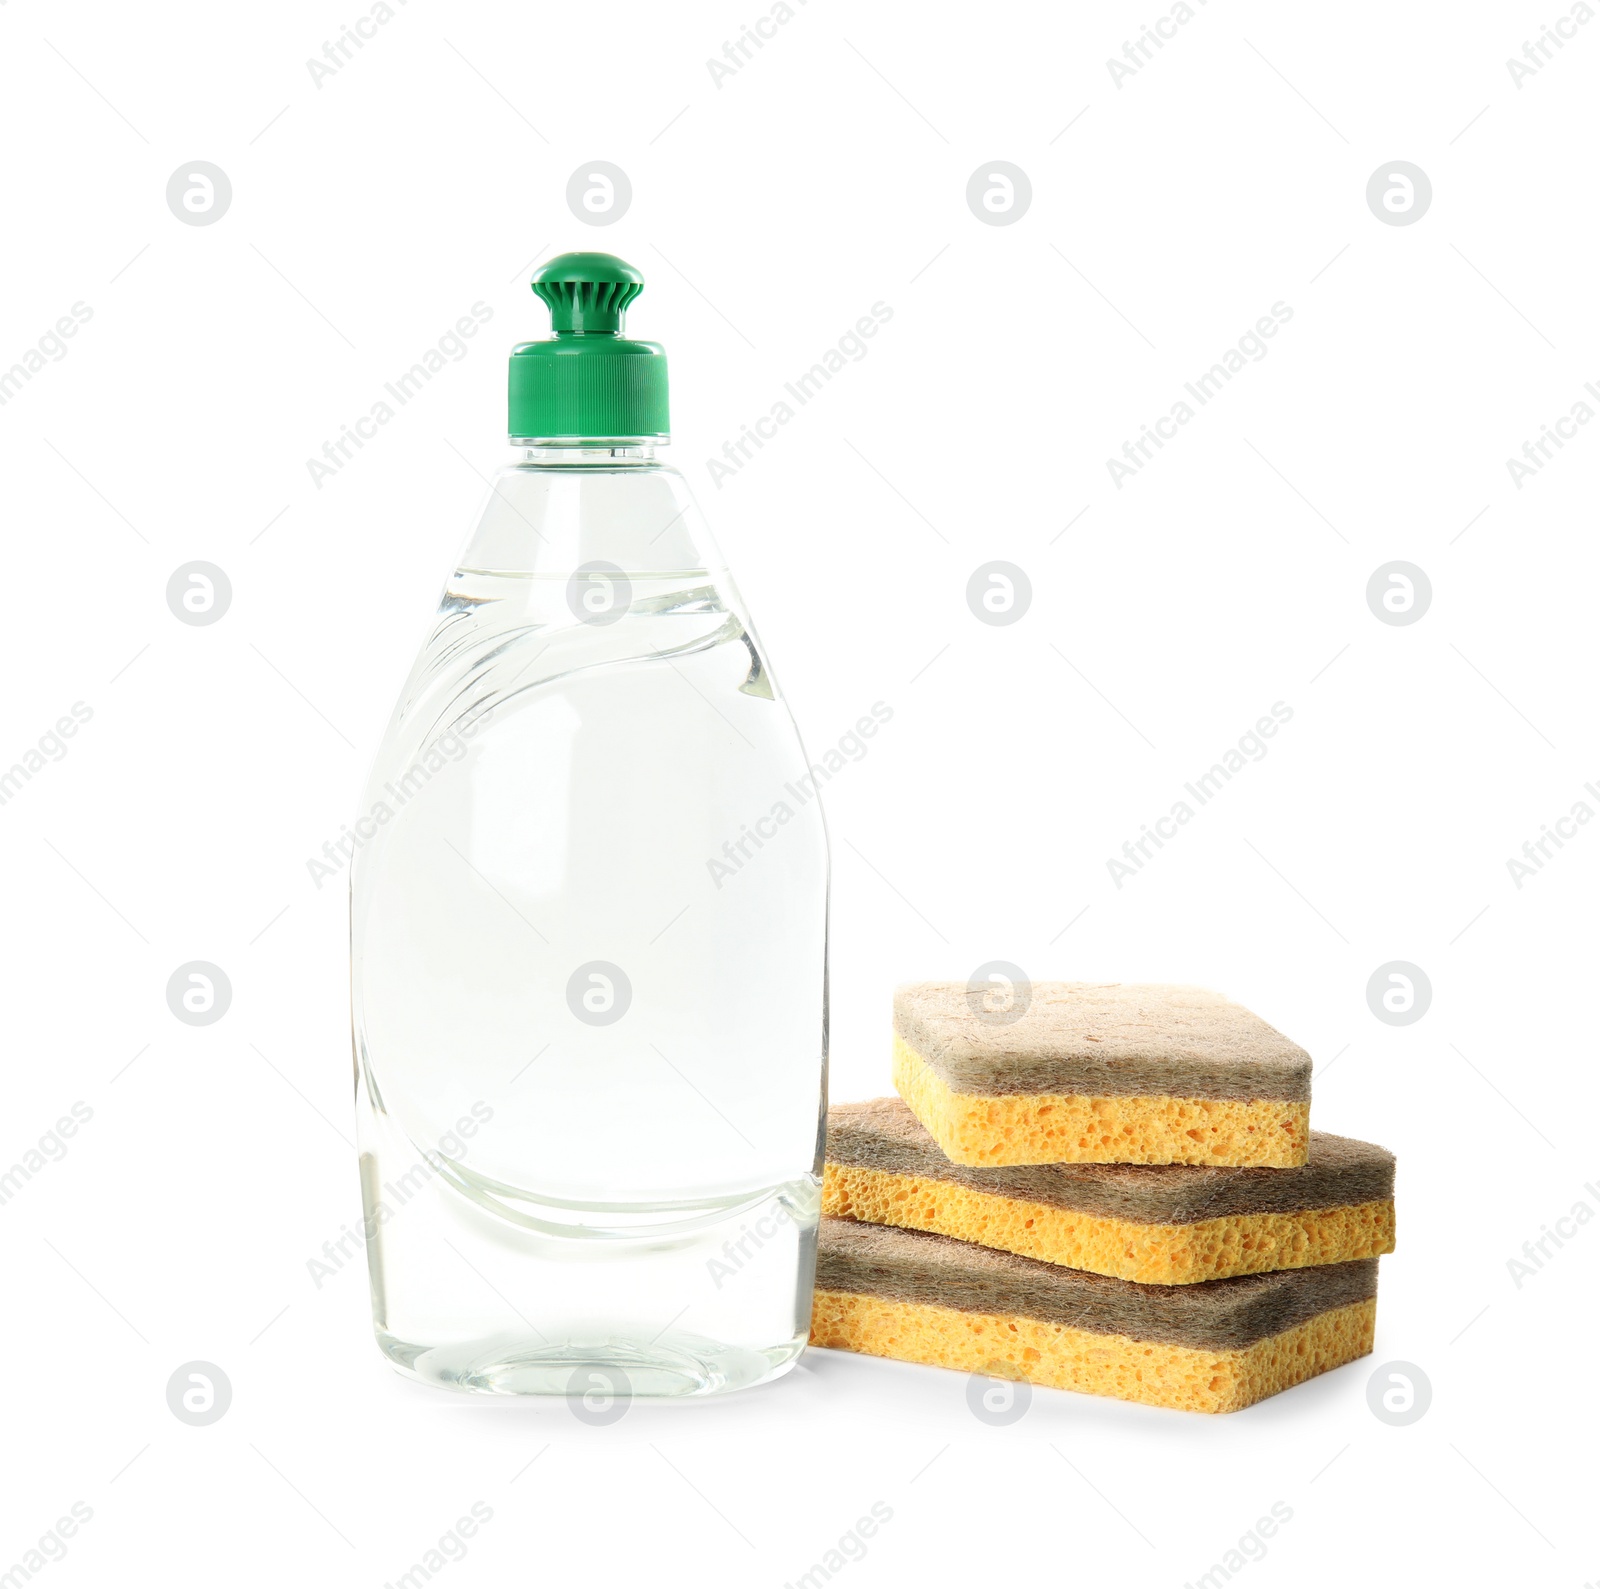 Photo of Cleaning supply and sponges for dish washing on white background